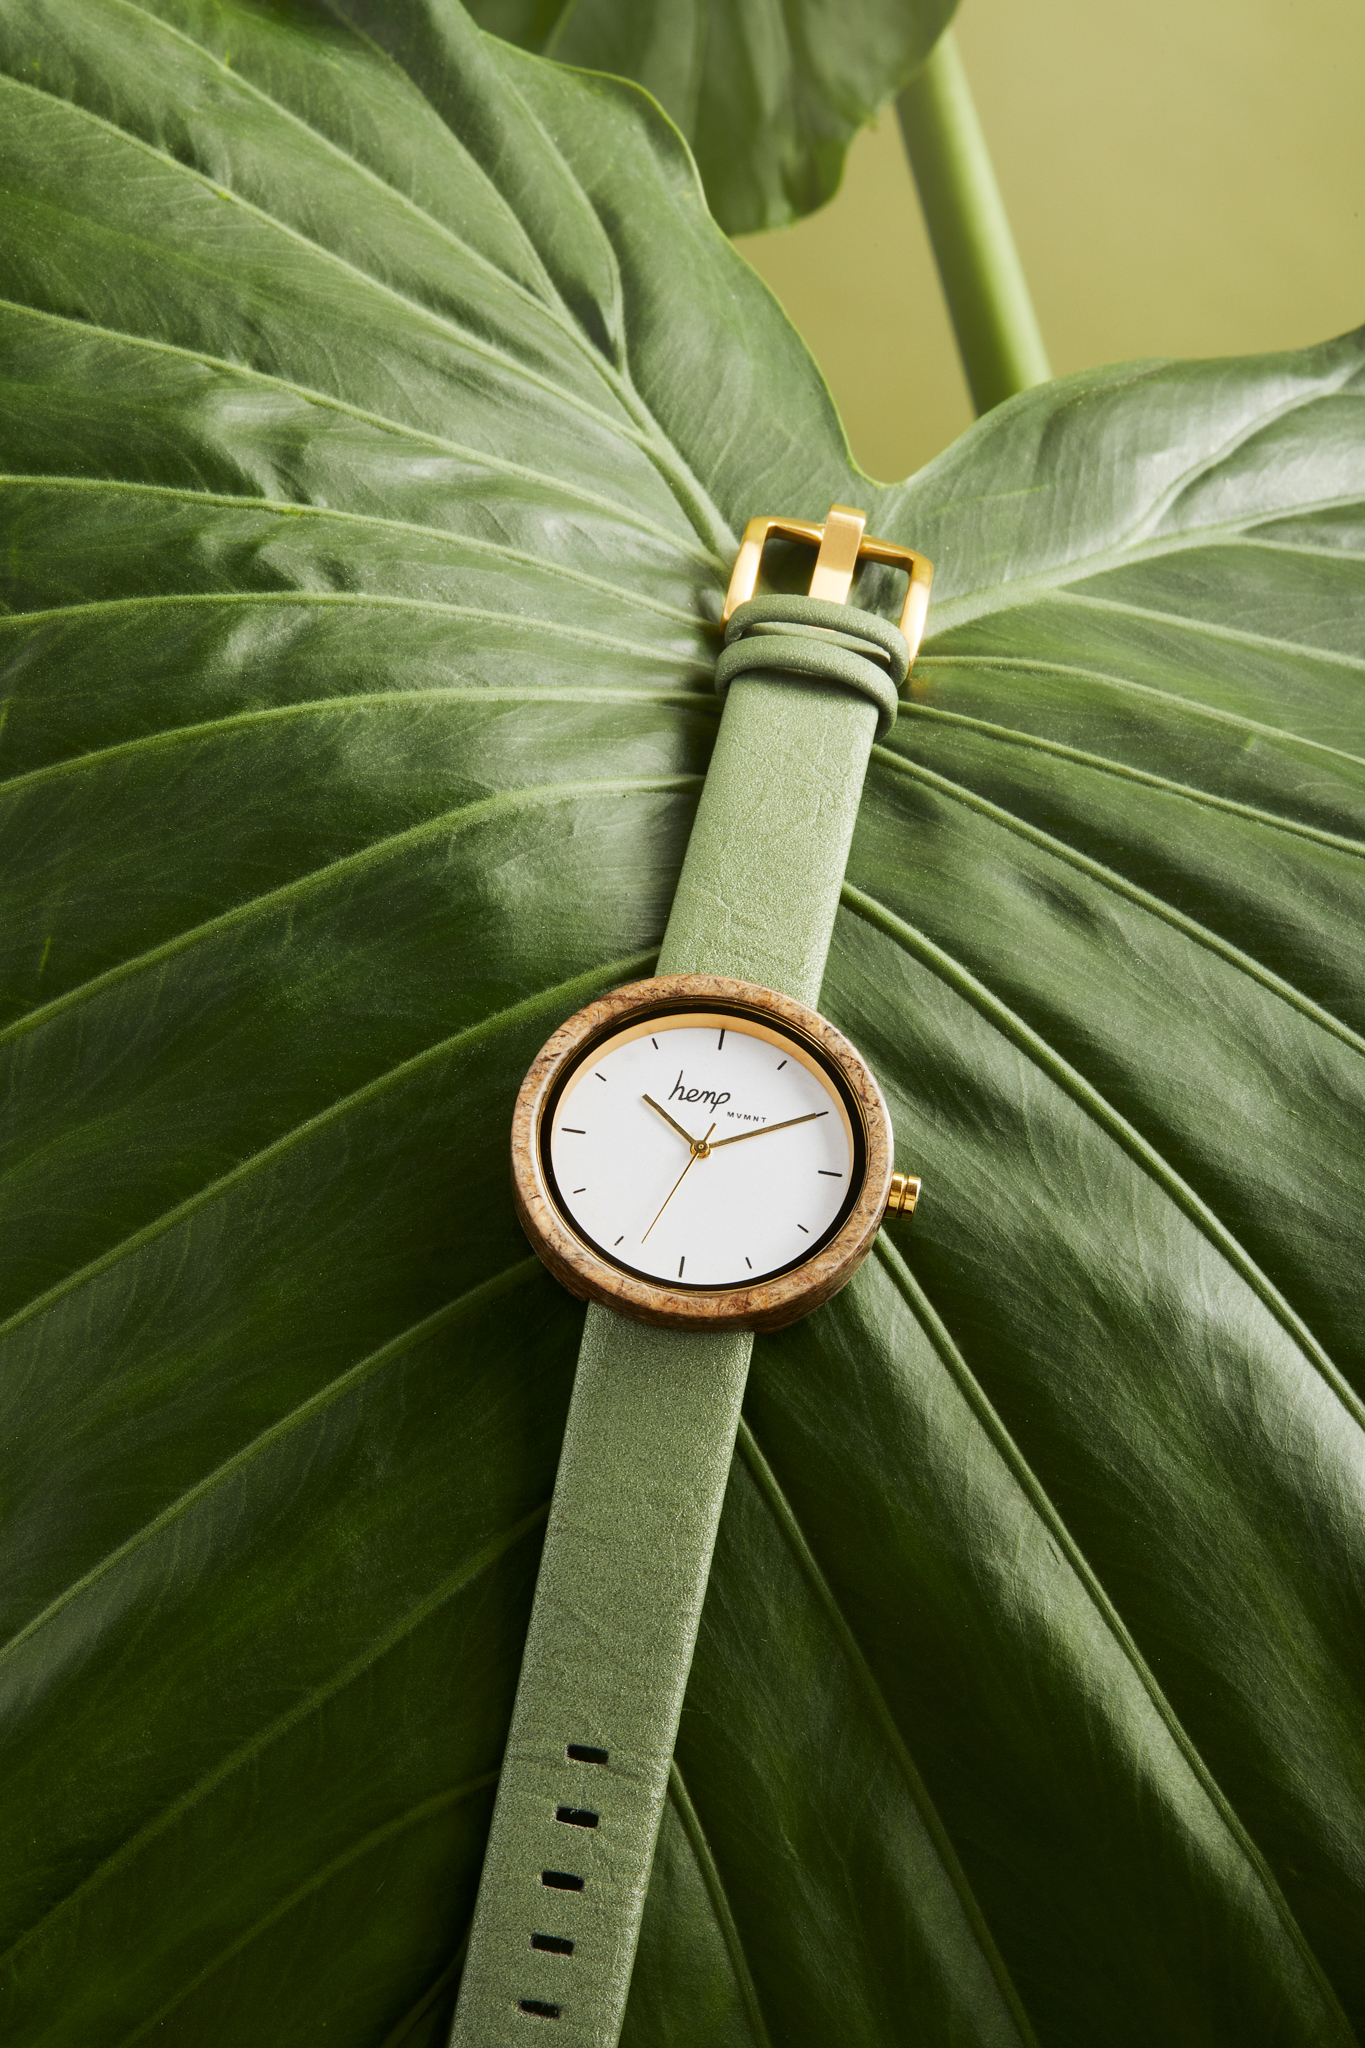 The world's first hemp watch, to be released on April 13th.